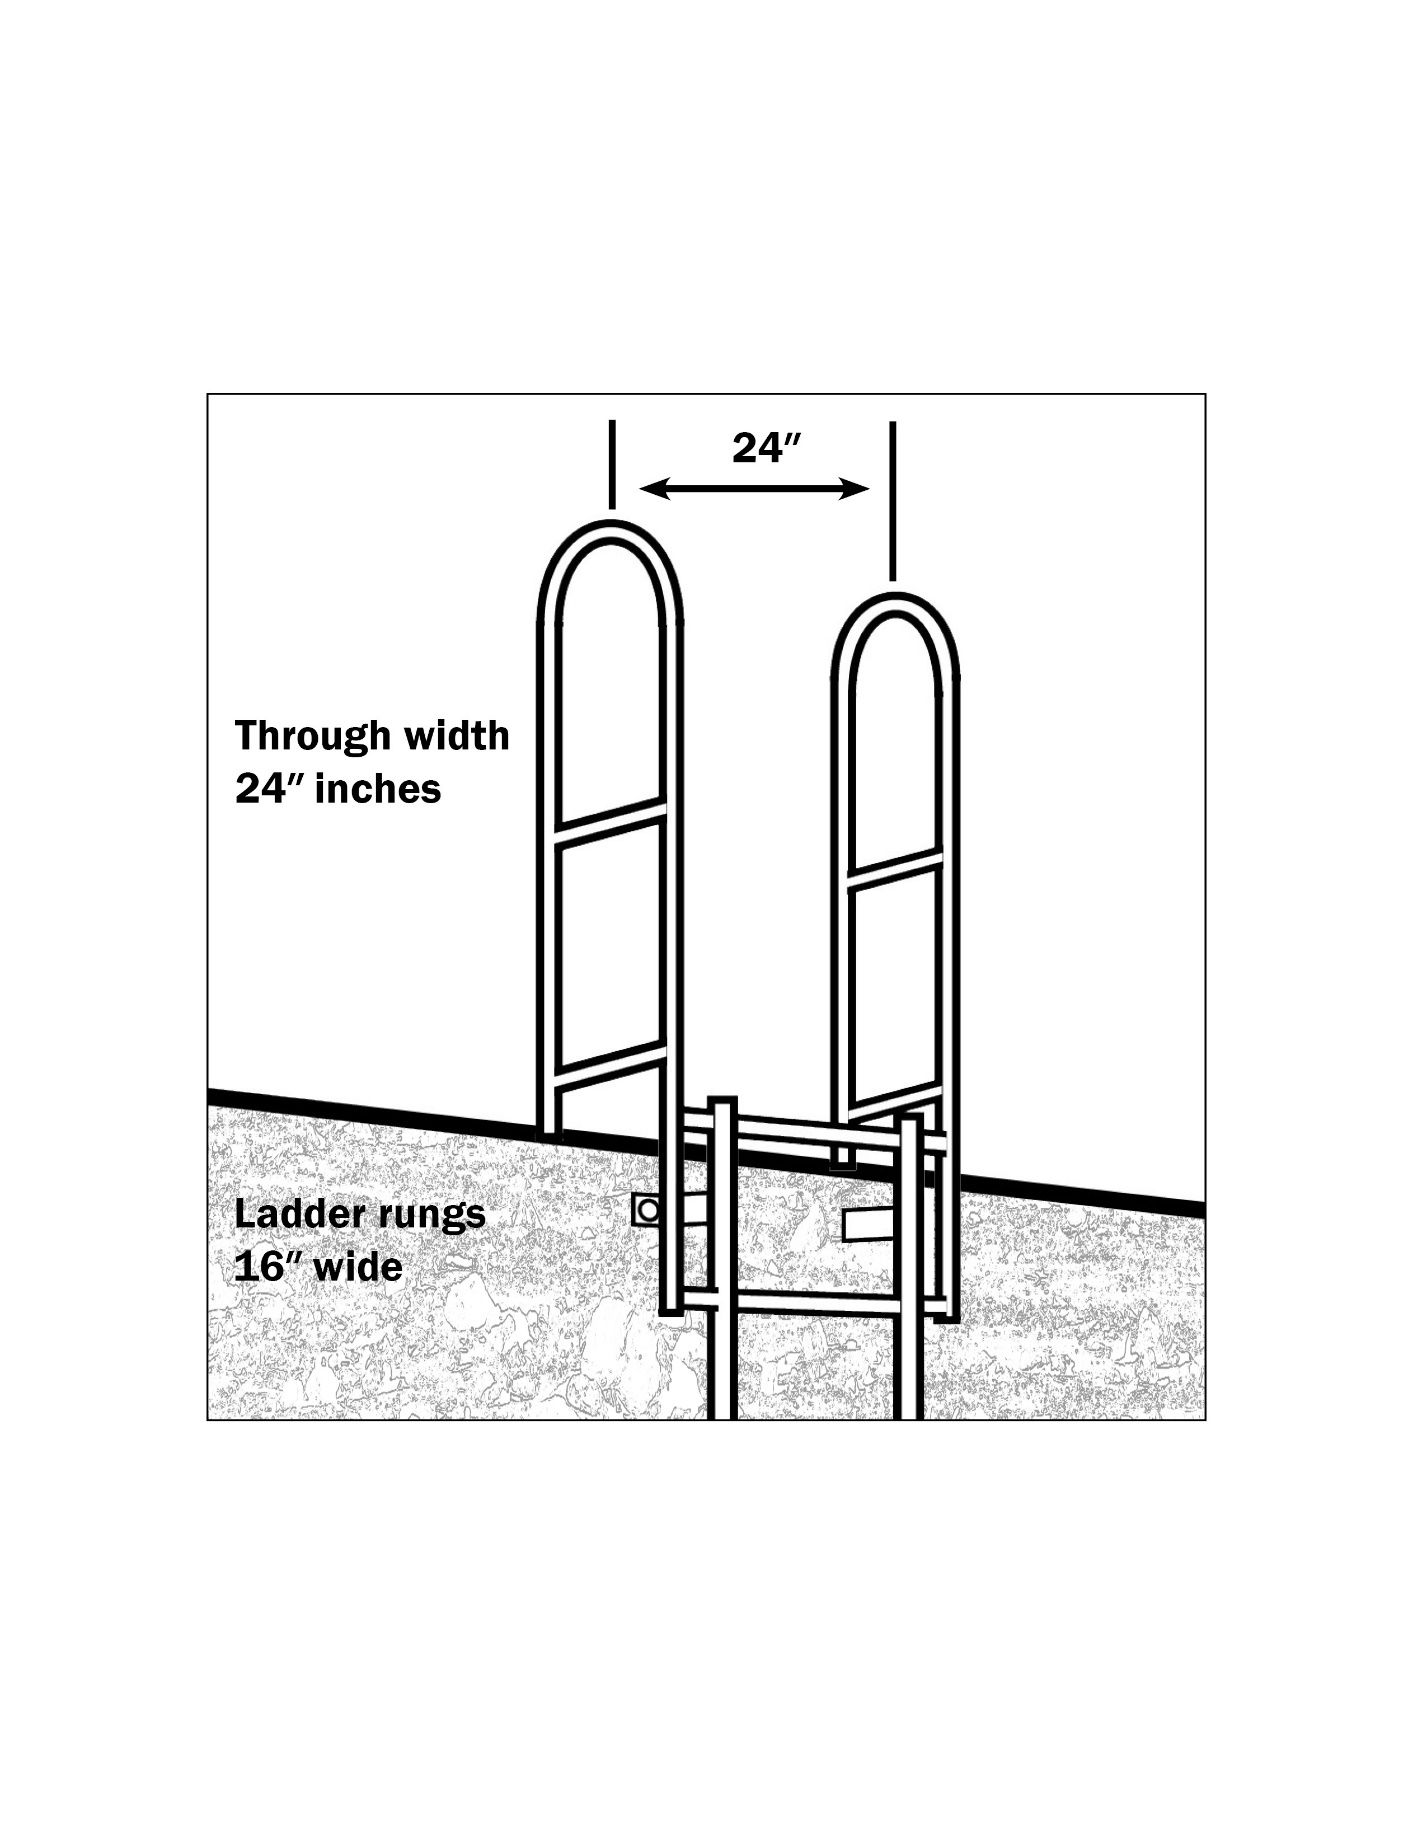 The grab bars at the top of a fixed ladder provide extra width for safer passage to the access level. 